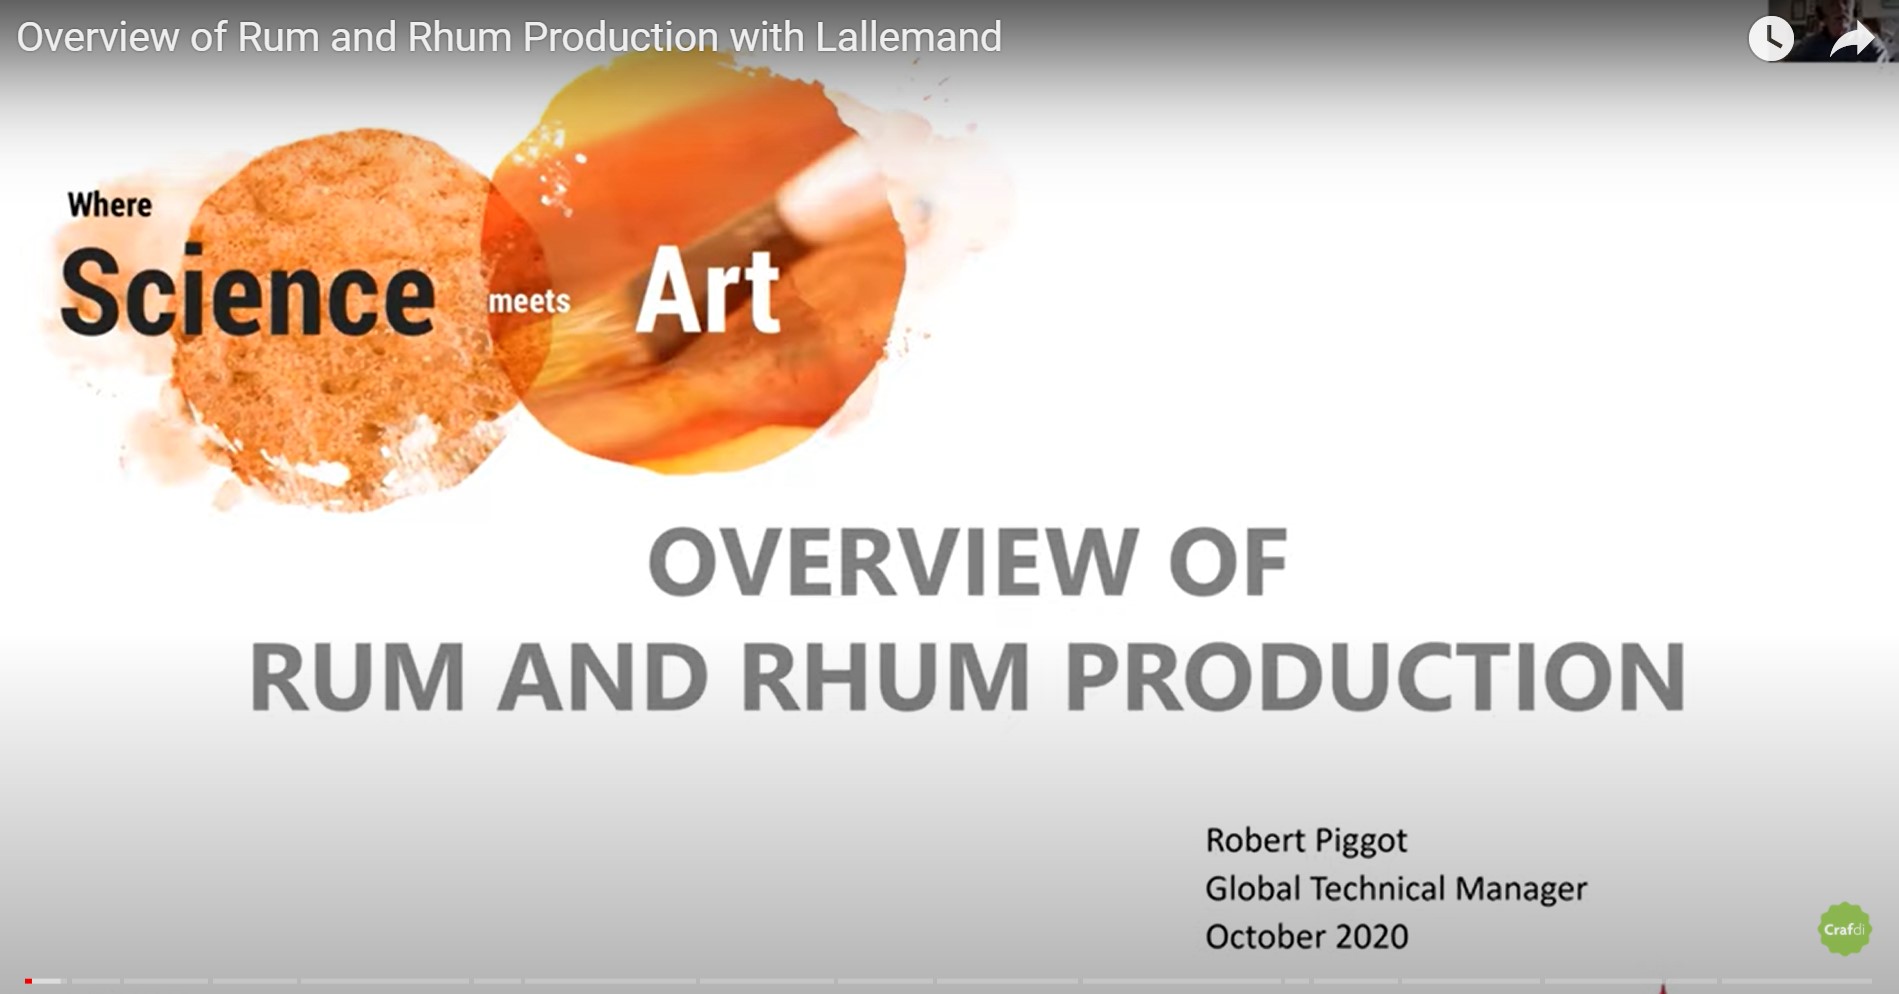 Overview of Rum and Rhum Production